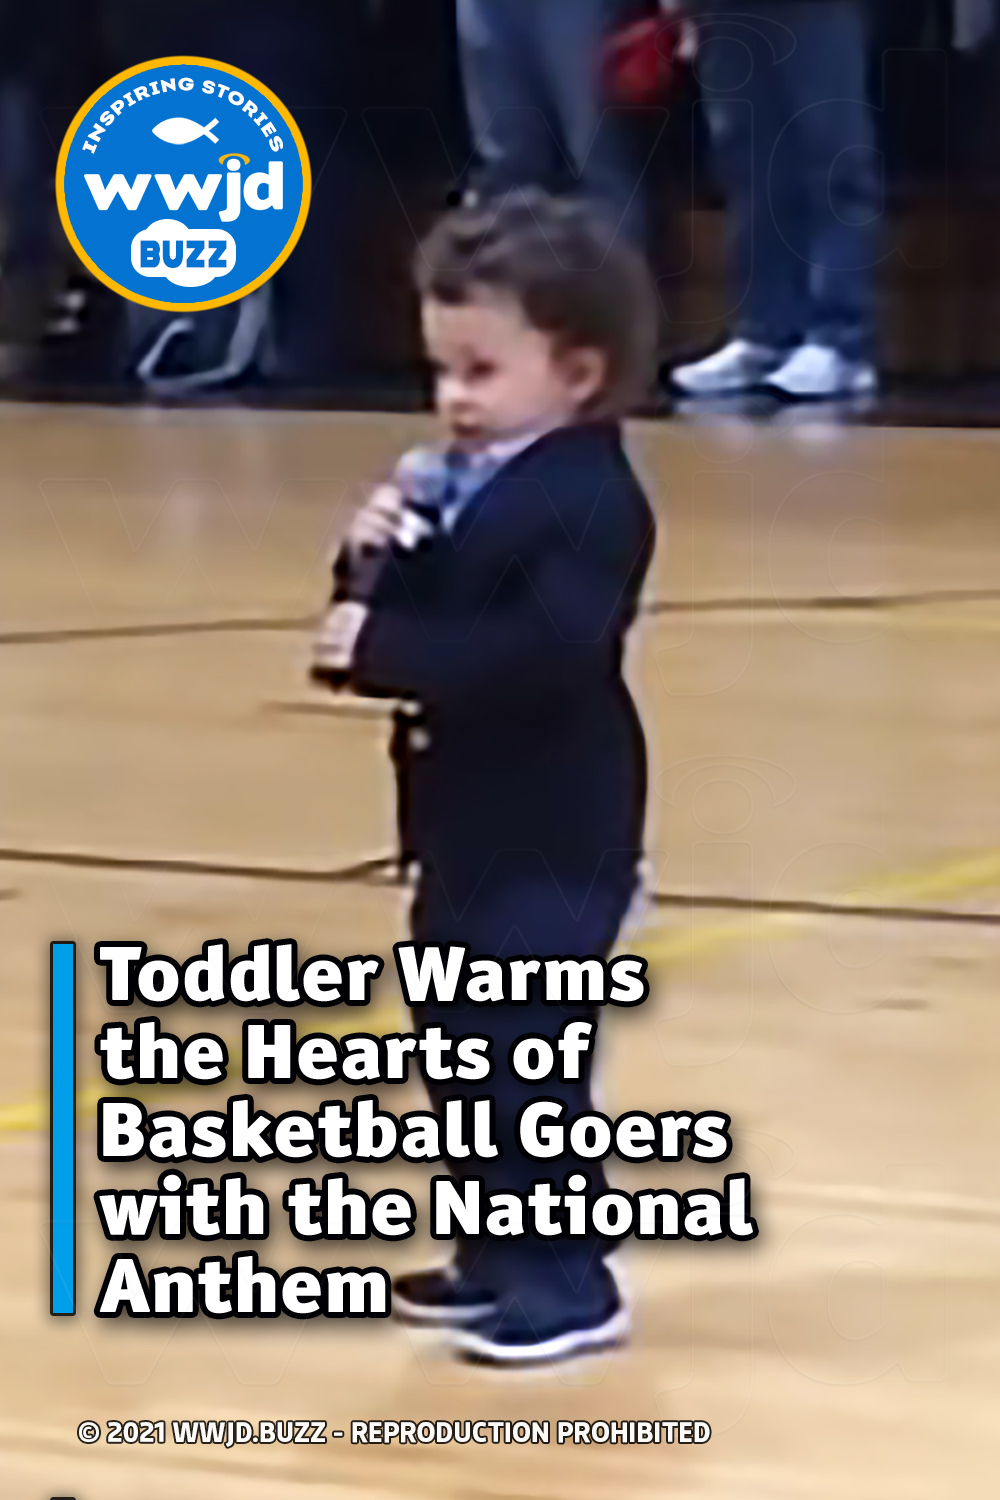 Toddler Warms the Hearts of Basketball Goers with the National Anthem